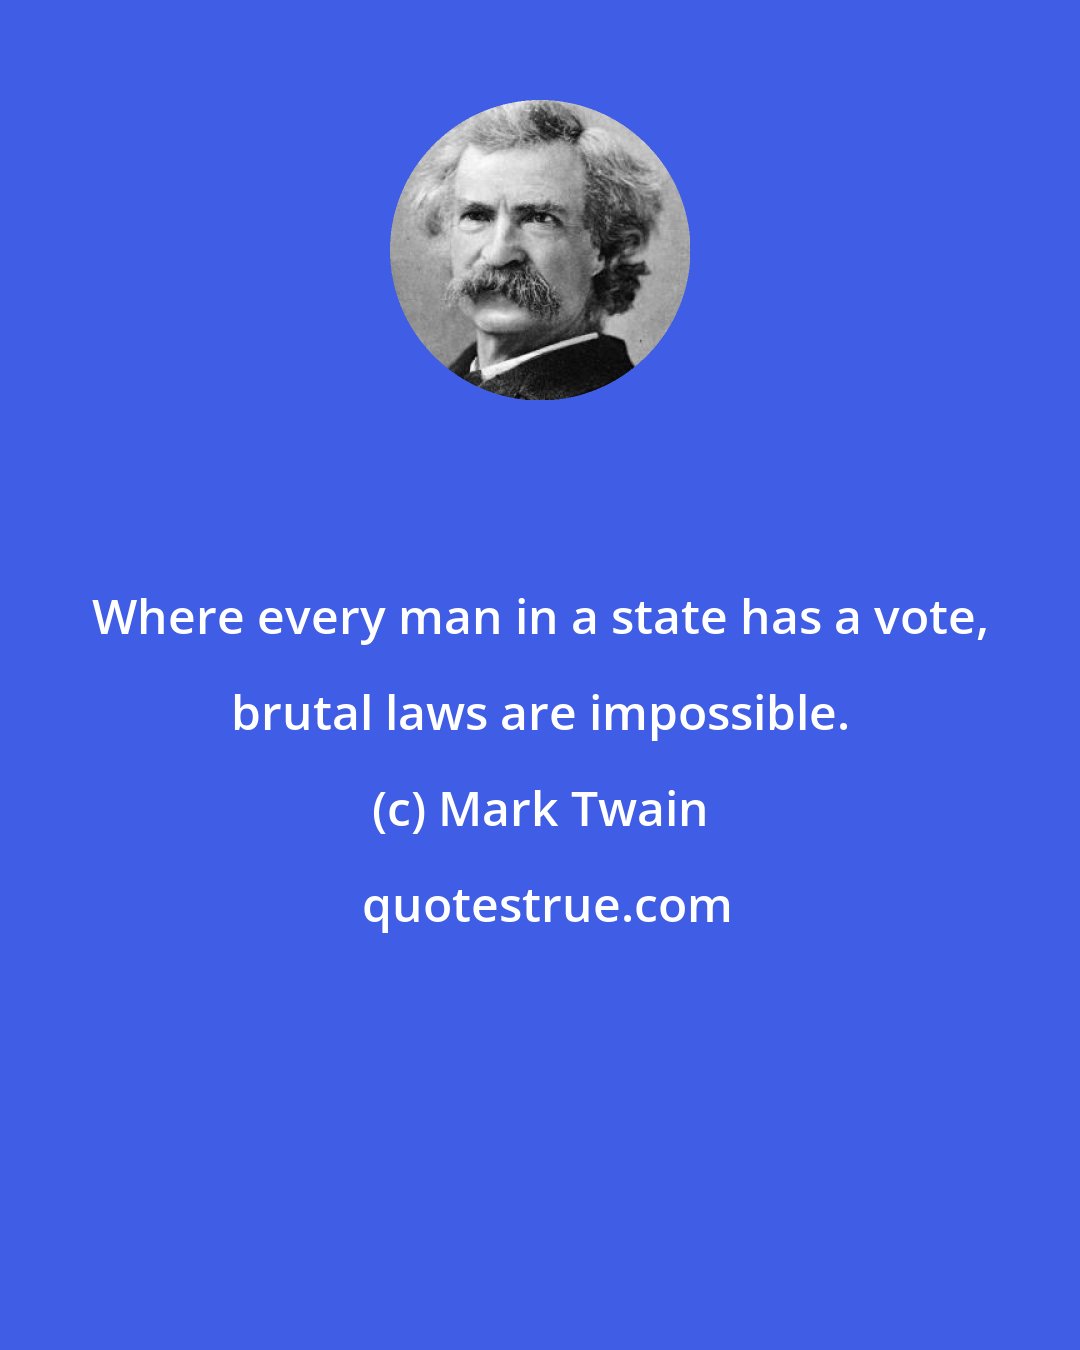 Mark Twain: Where every man in a state has a vote, brutal laws are impossible.